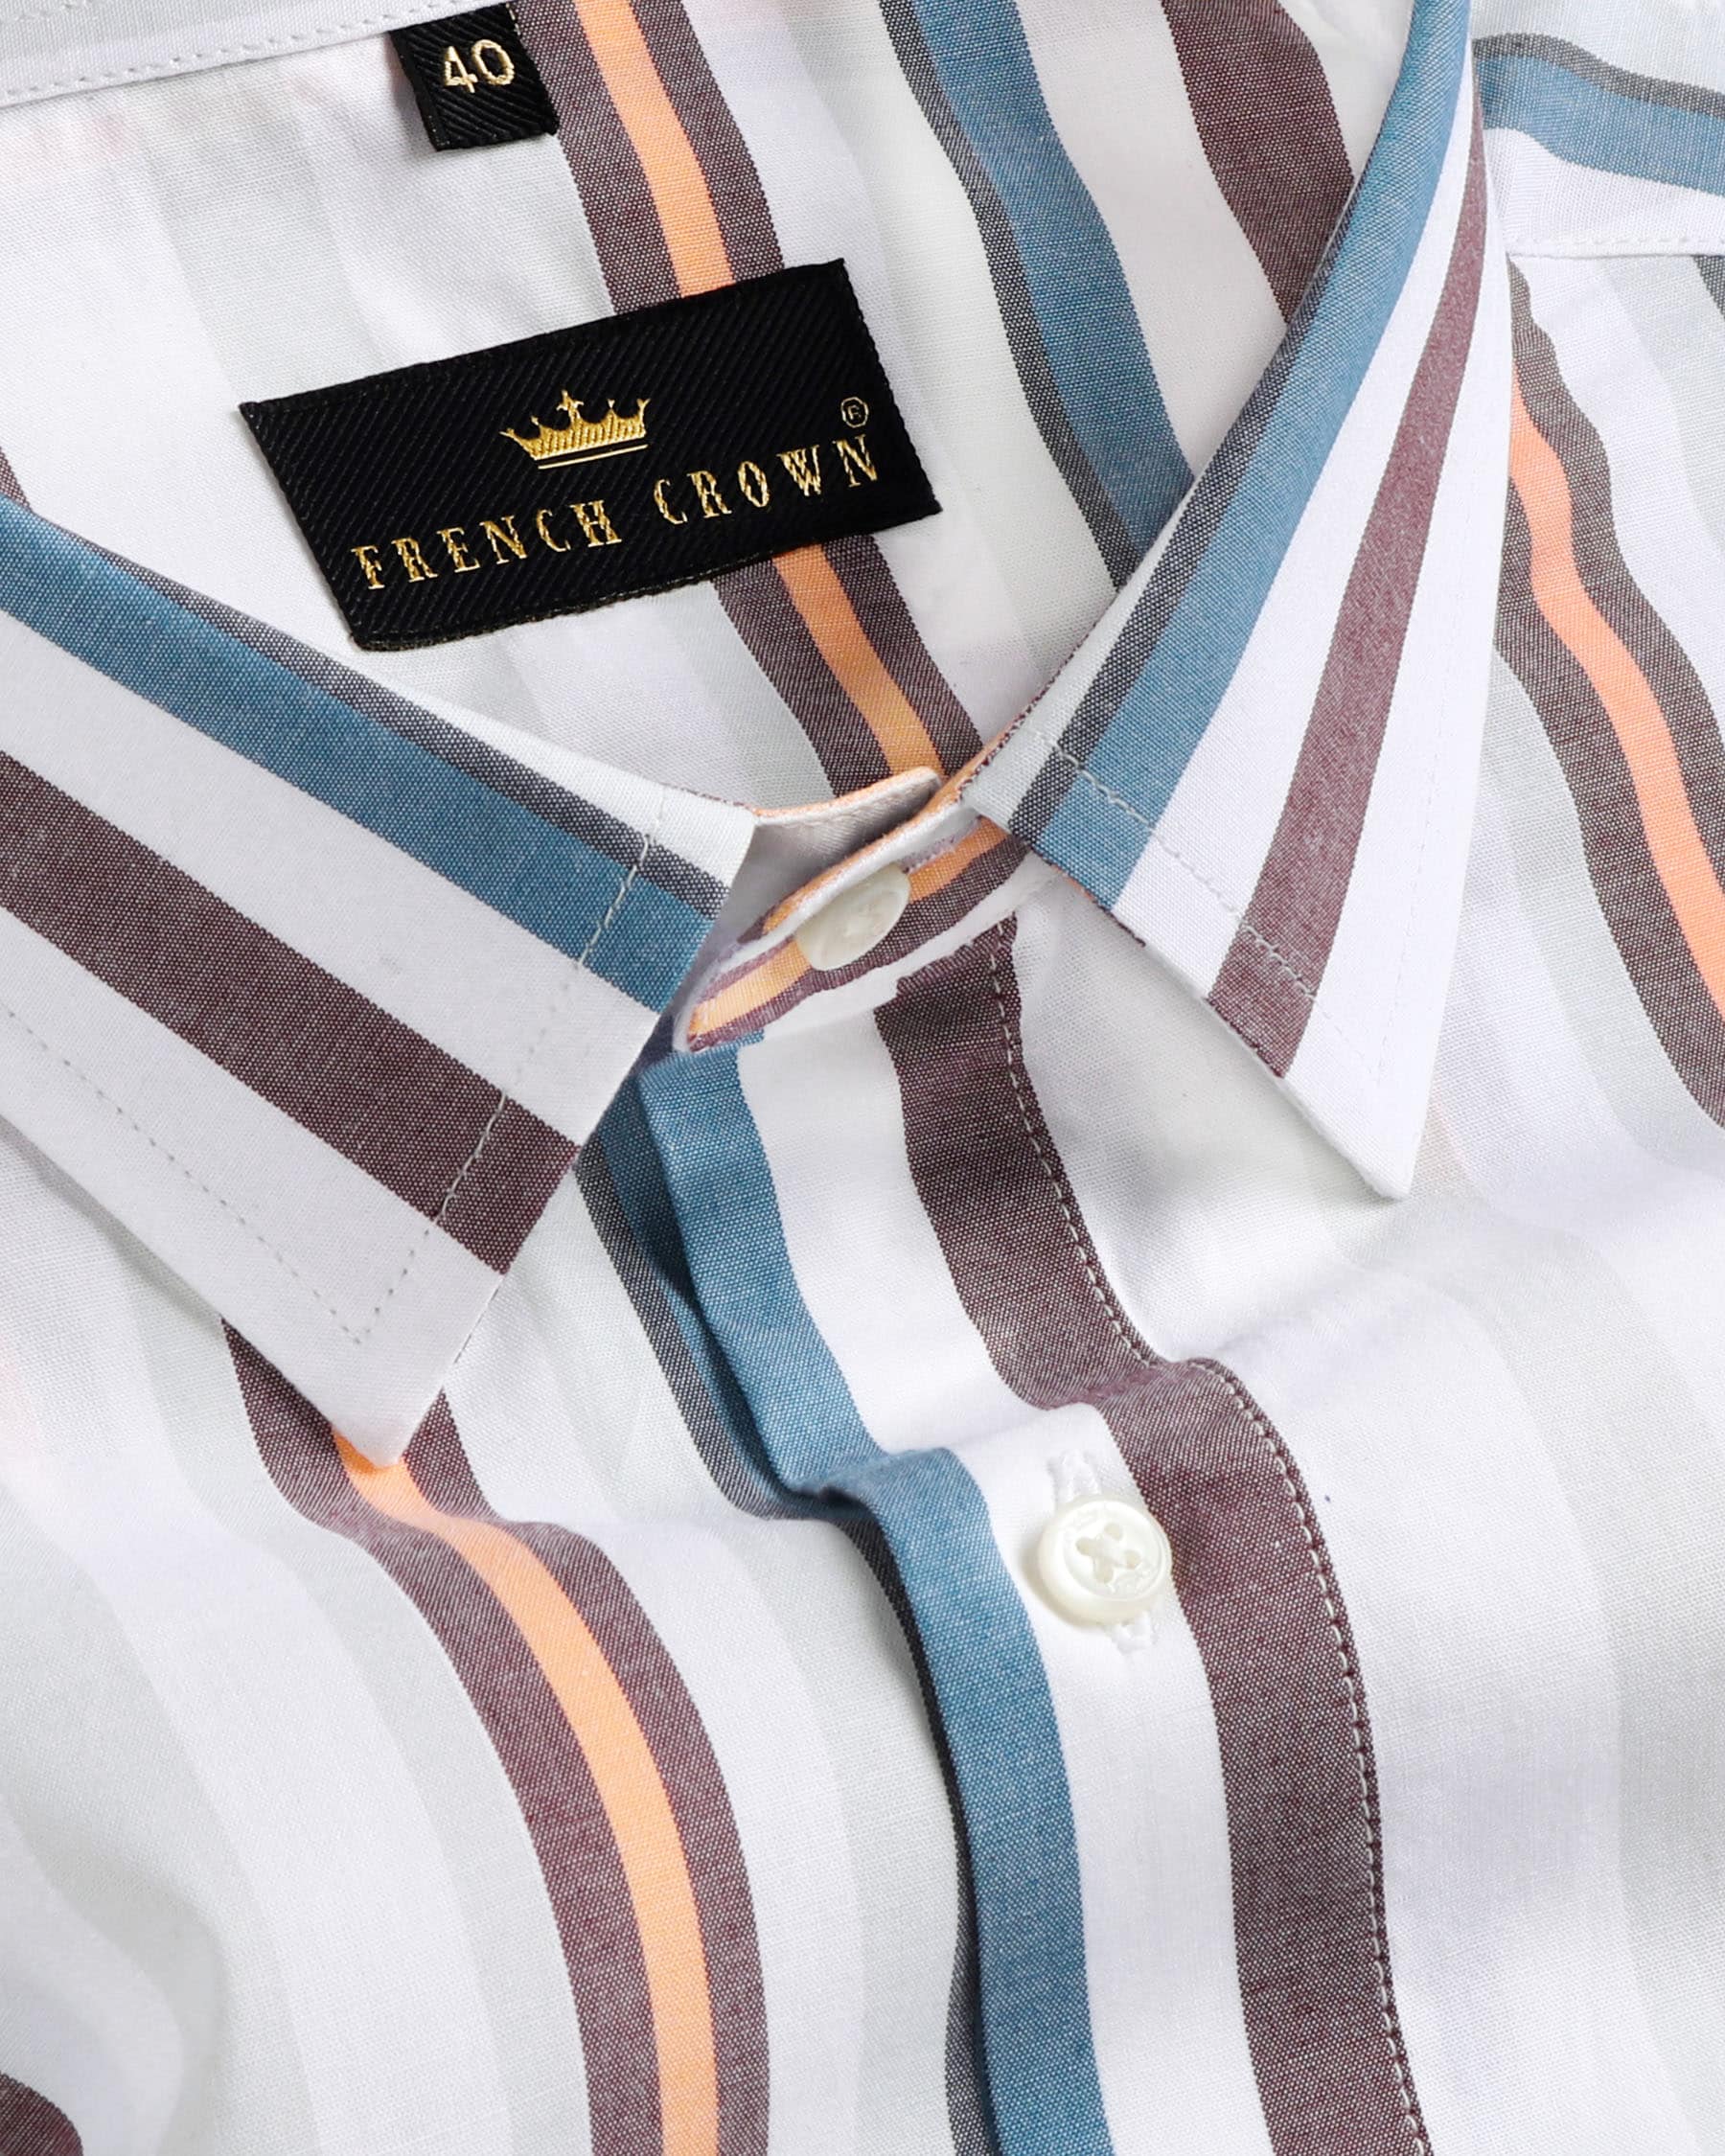 White with Colorful Retro Striped Premium Cotton Shirt 4308-H-48, 4308-H-52, 4308-H-39, 4308-H-40, 4308-42, 4308-H-42, 4308-46, 4308-H-46, 4308-48, 4308-50, 4308-H-50, 4308-52, 4308-38, 4308-39, 4308-44, 4308-H-44, 4308-H-38, 4308-40